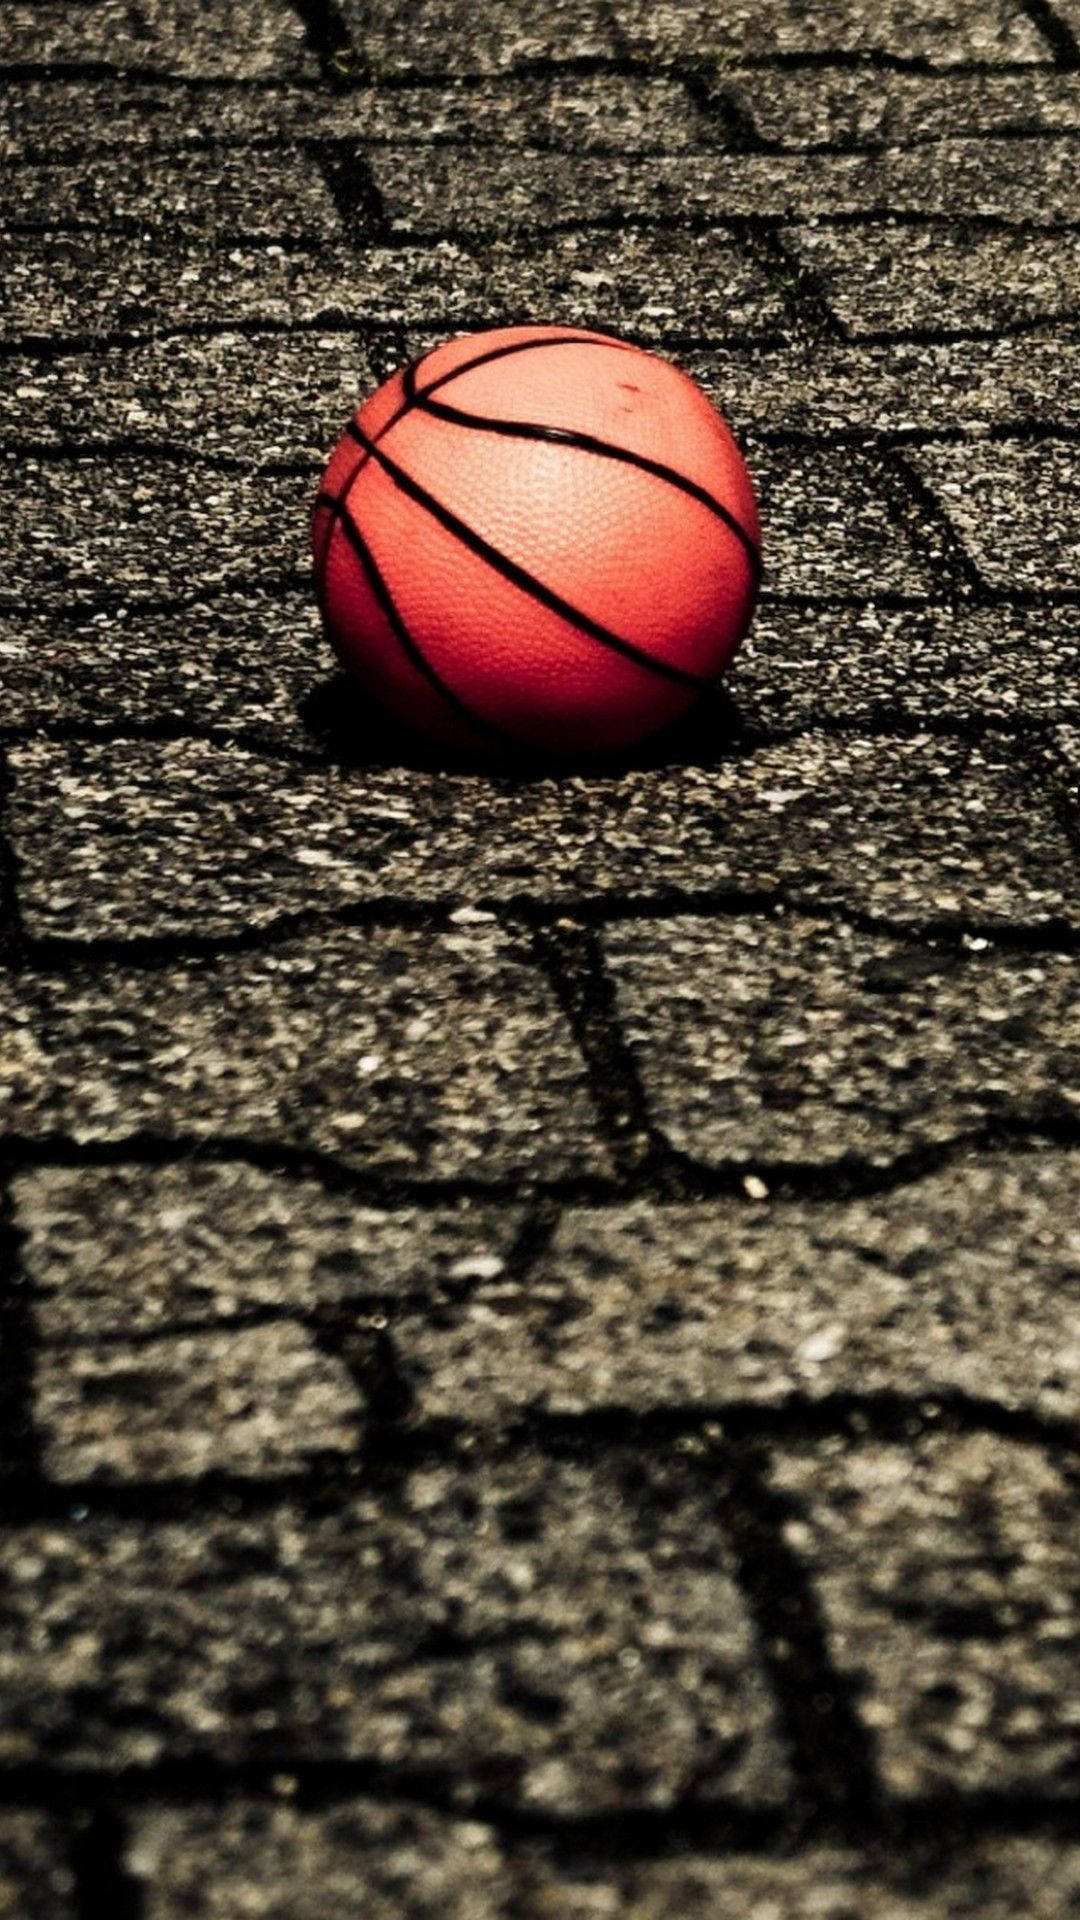 Hd Basketball In Ground Background